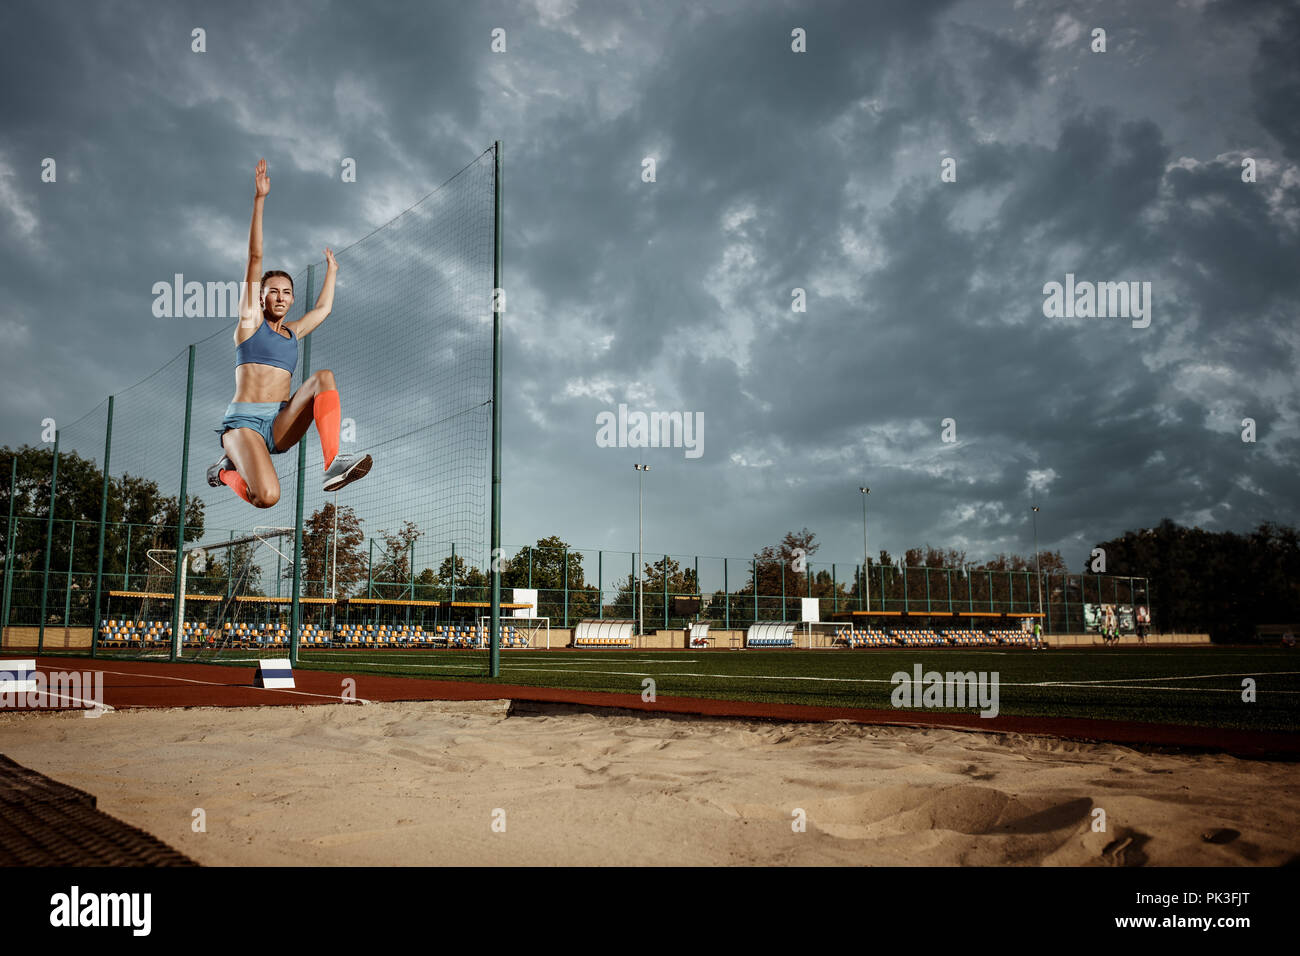 Long Jump Athlete in Motion Vector Illustration, Sport Competition